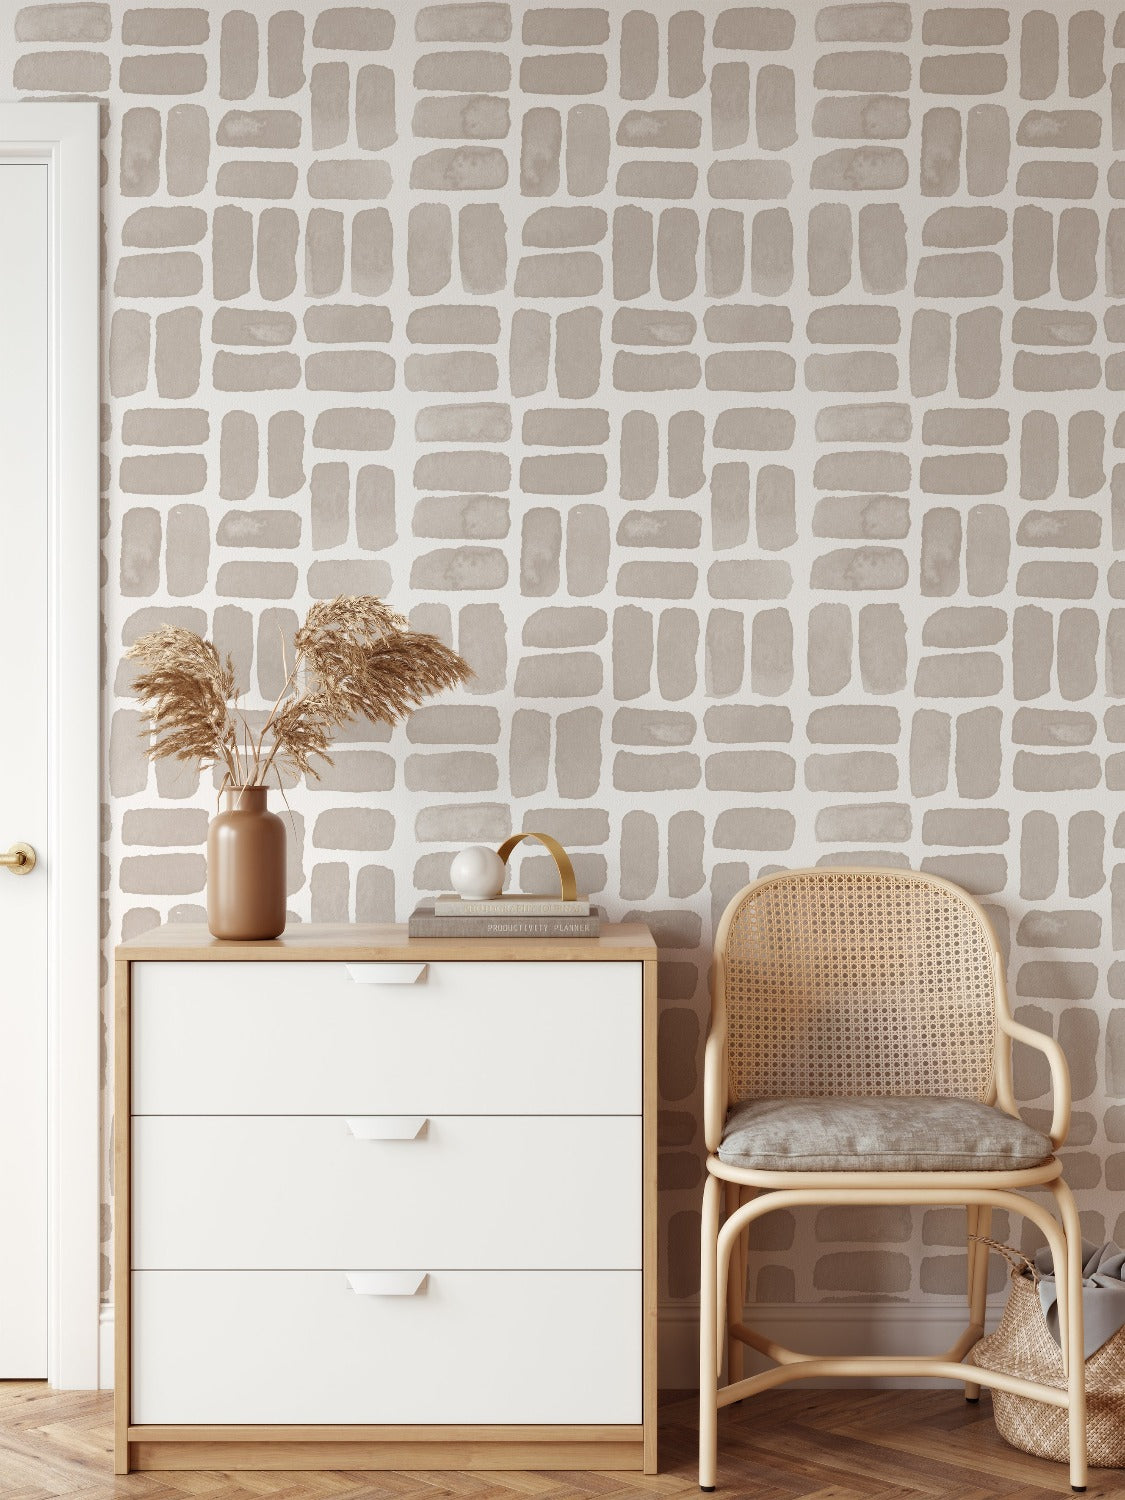 A cozy corner of a room featuring the 'Sea Breeze Wallpaper', with a hand-painted style beige brick pattern giving a soft, textured look, accompanied by a modern white dresser and a rattan chair with a cushion.